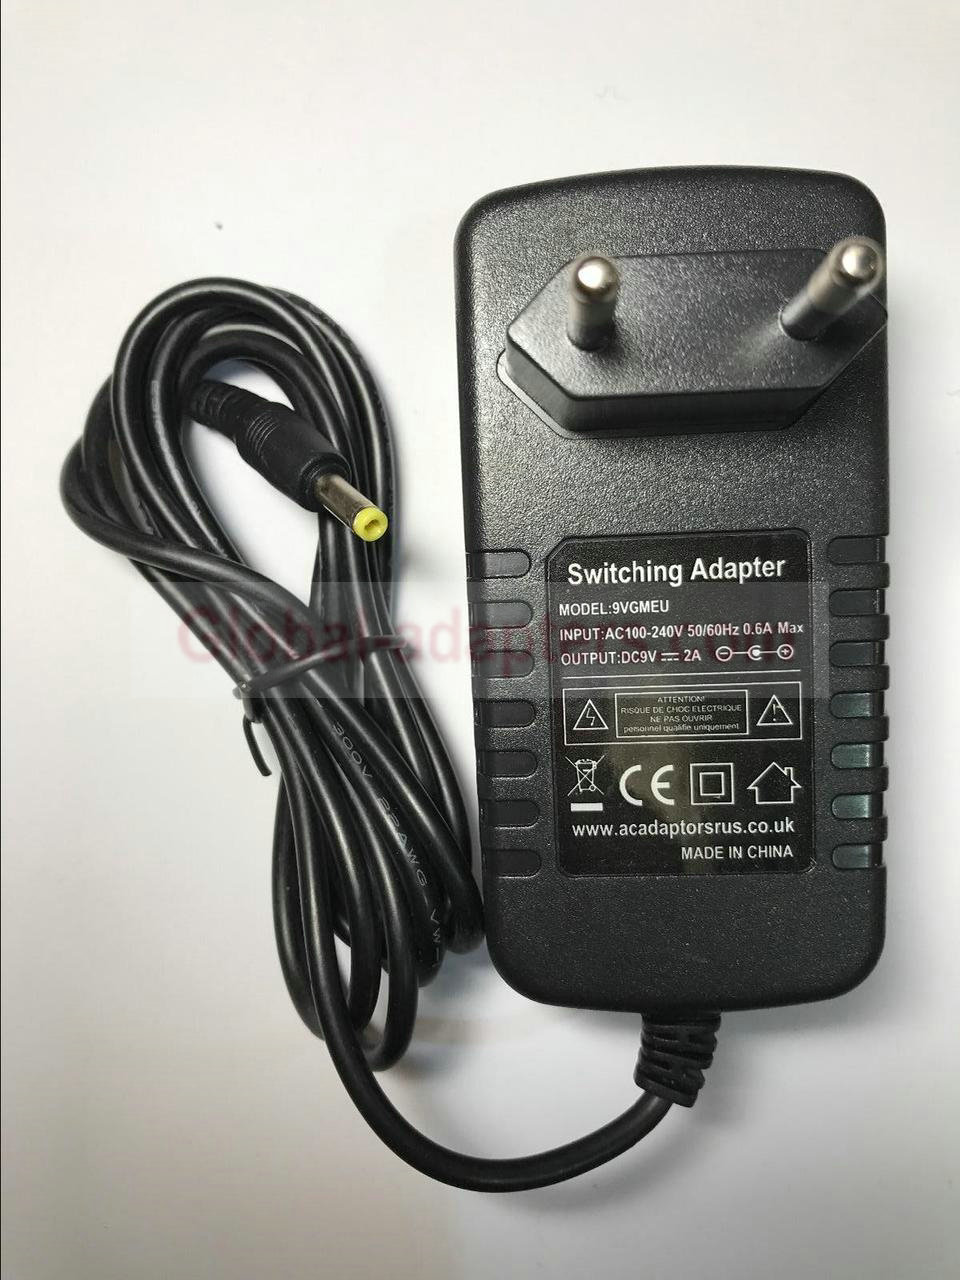 New DC9V 2A 9VGMEU Power Supply Switching Adapter